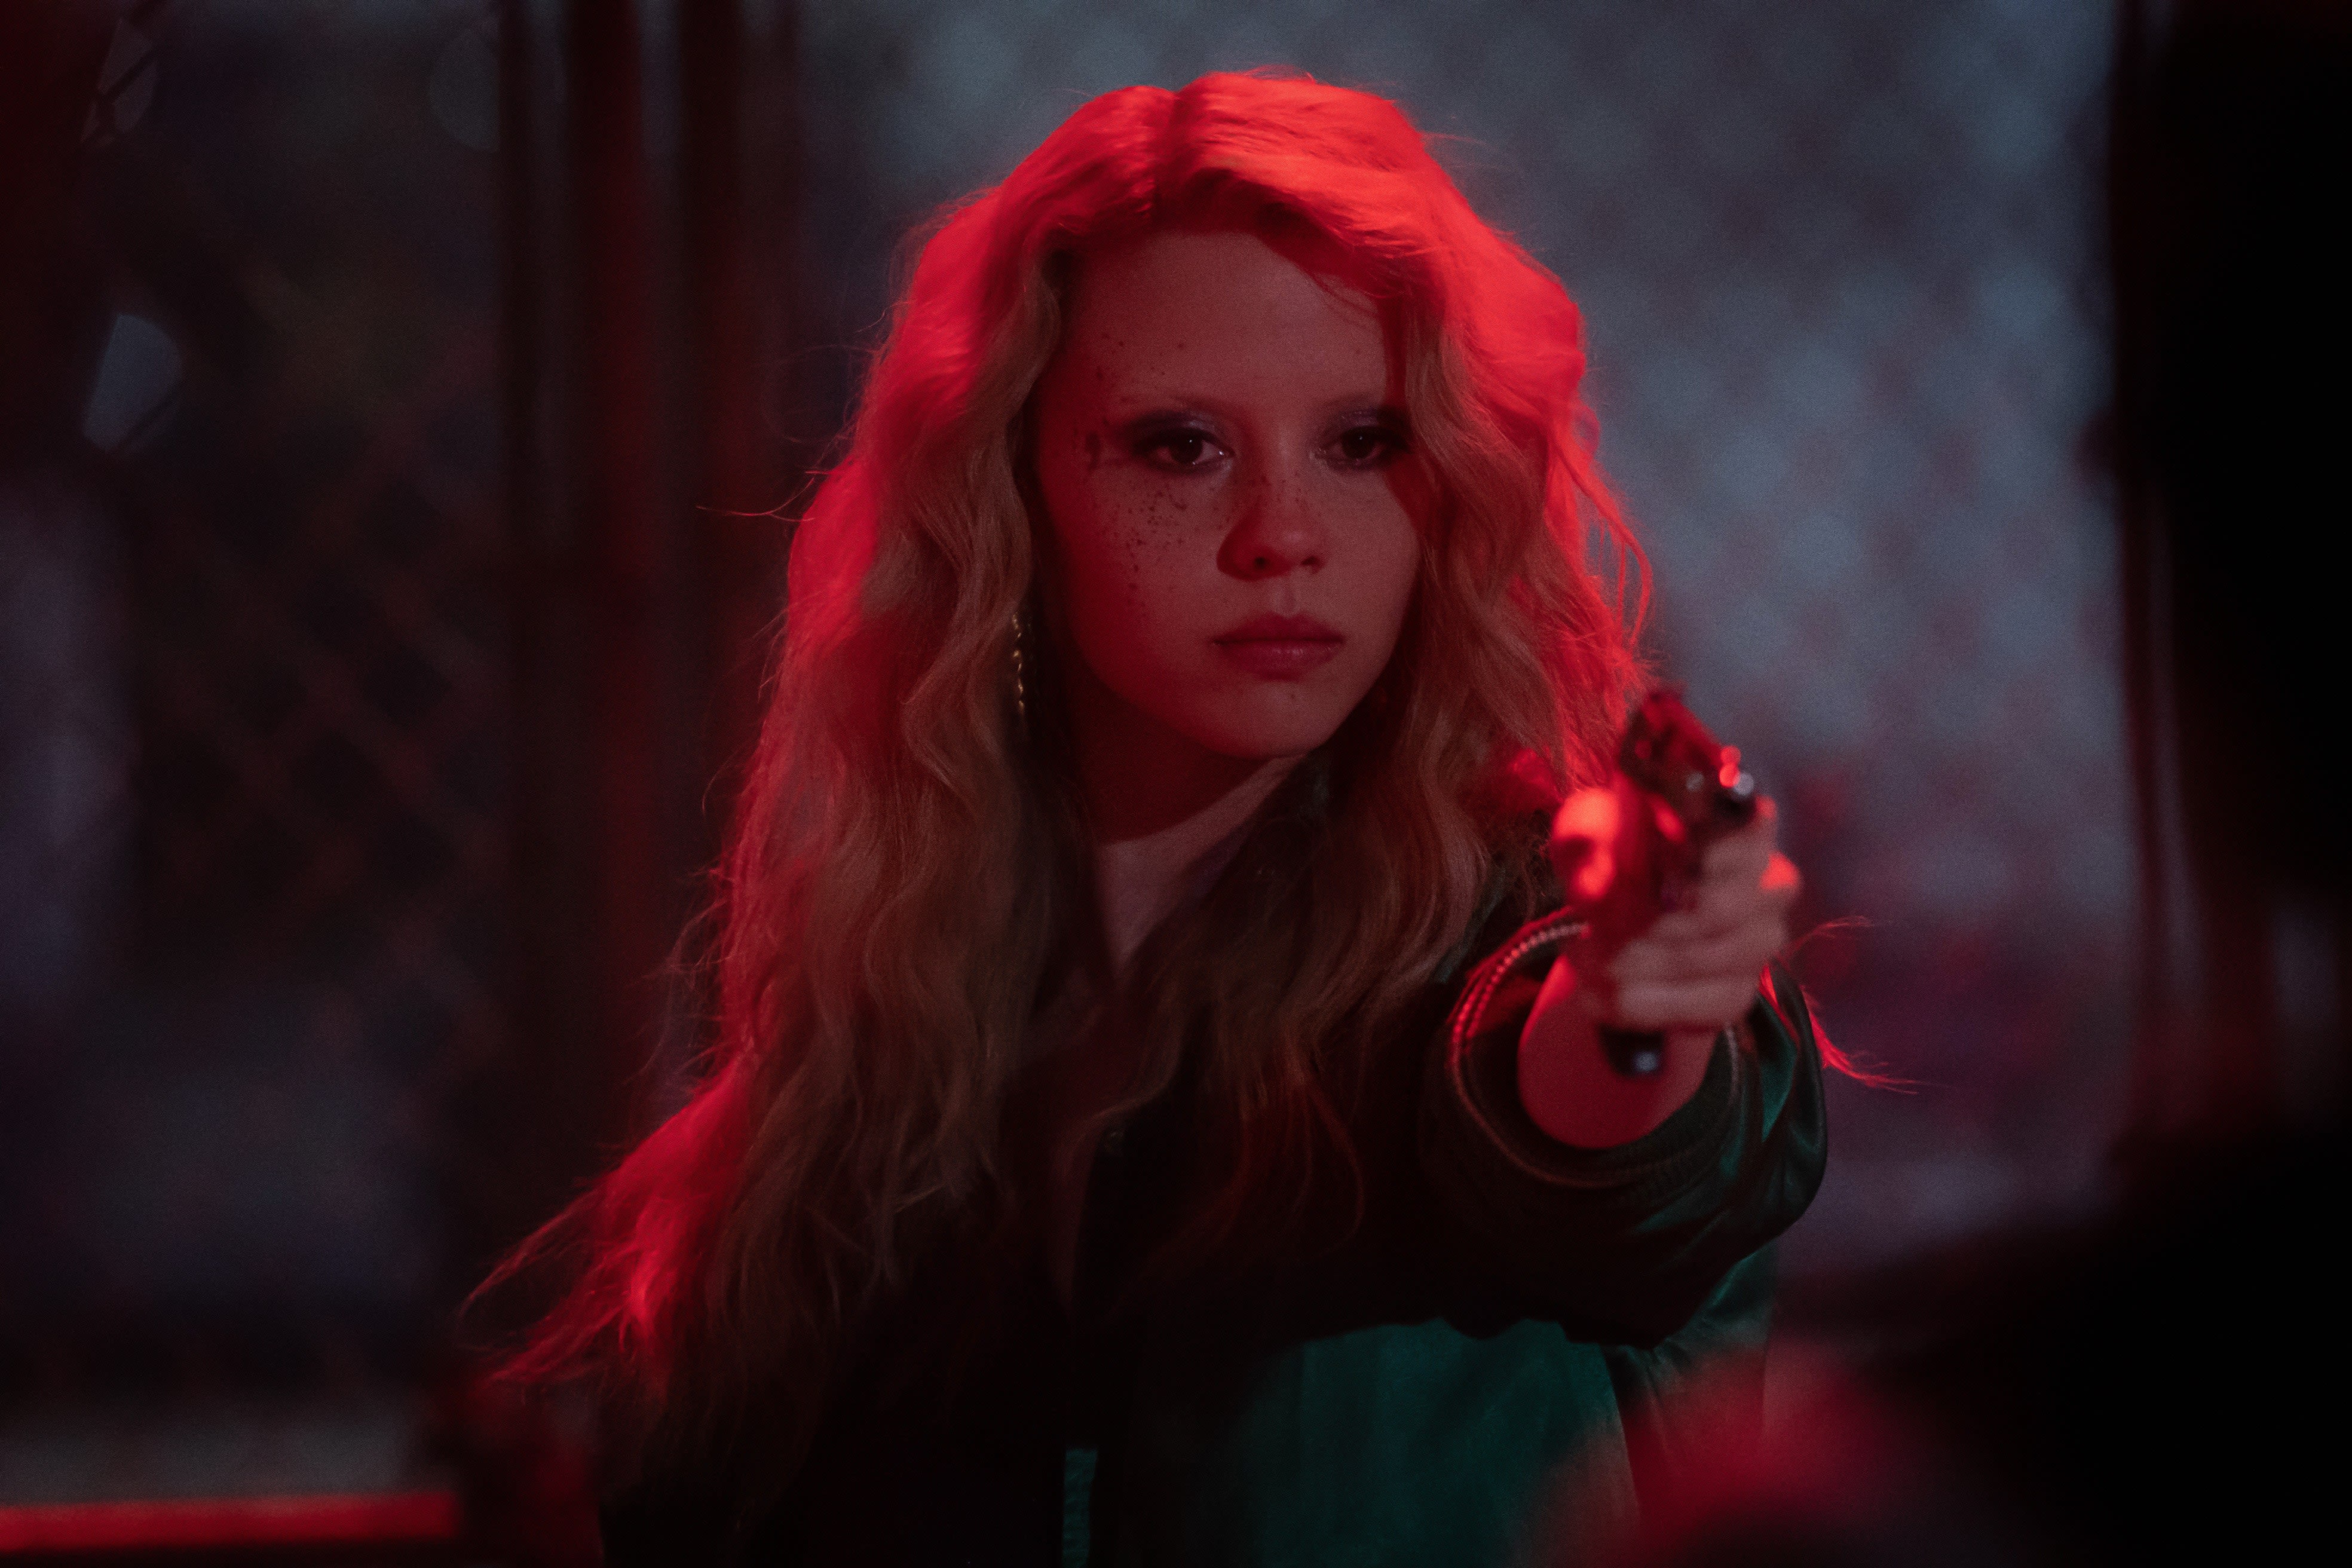 The Second Maxxxine Trailer Is Here: Mia Goth Goes Hollywood, Faces Death by '80s Vibes